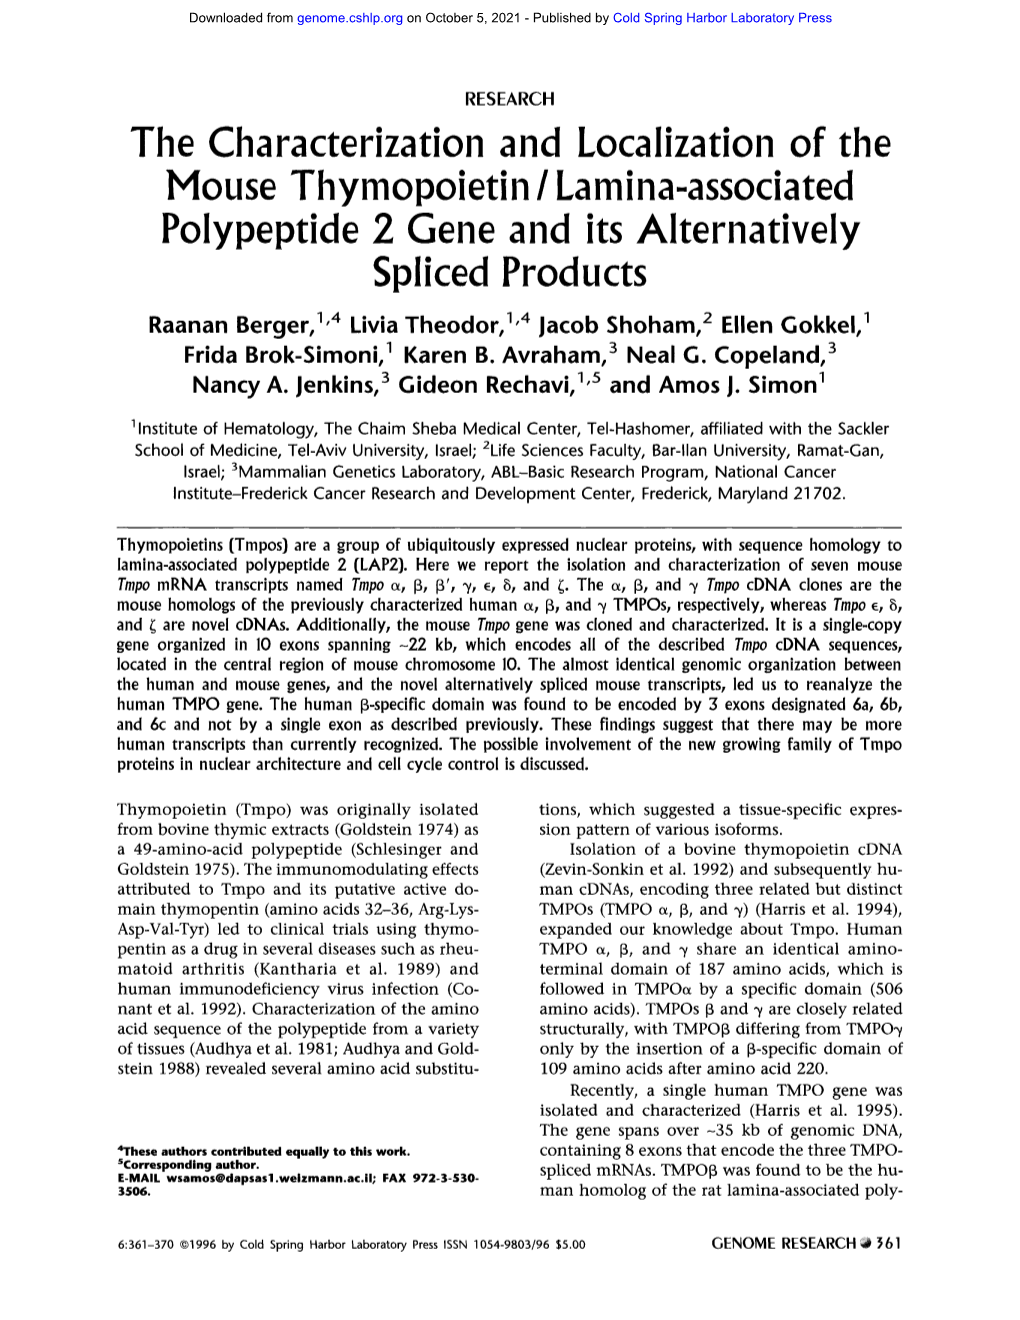 The Characterization and Localization of the Mouse Thymopoietin